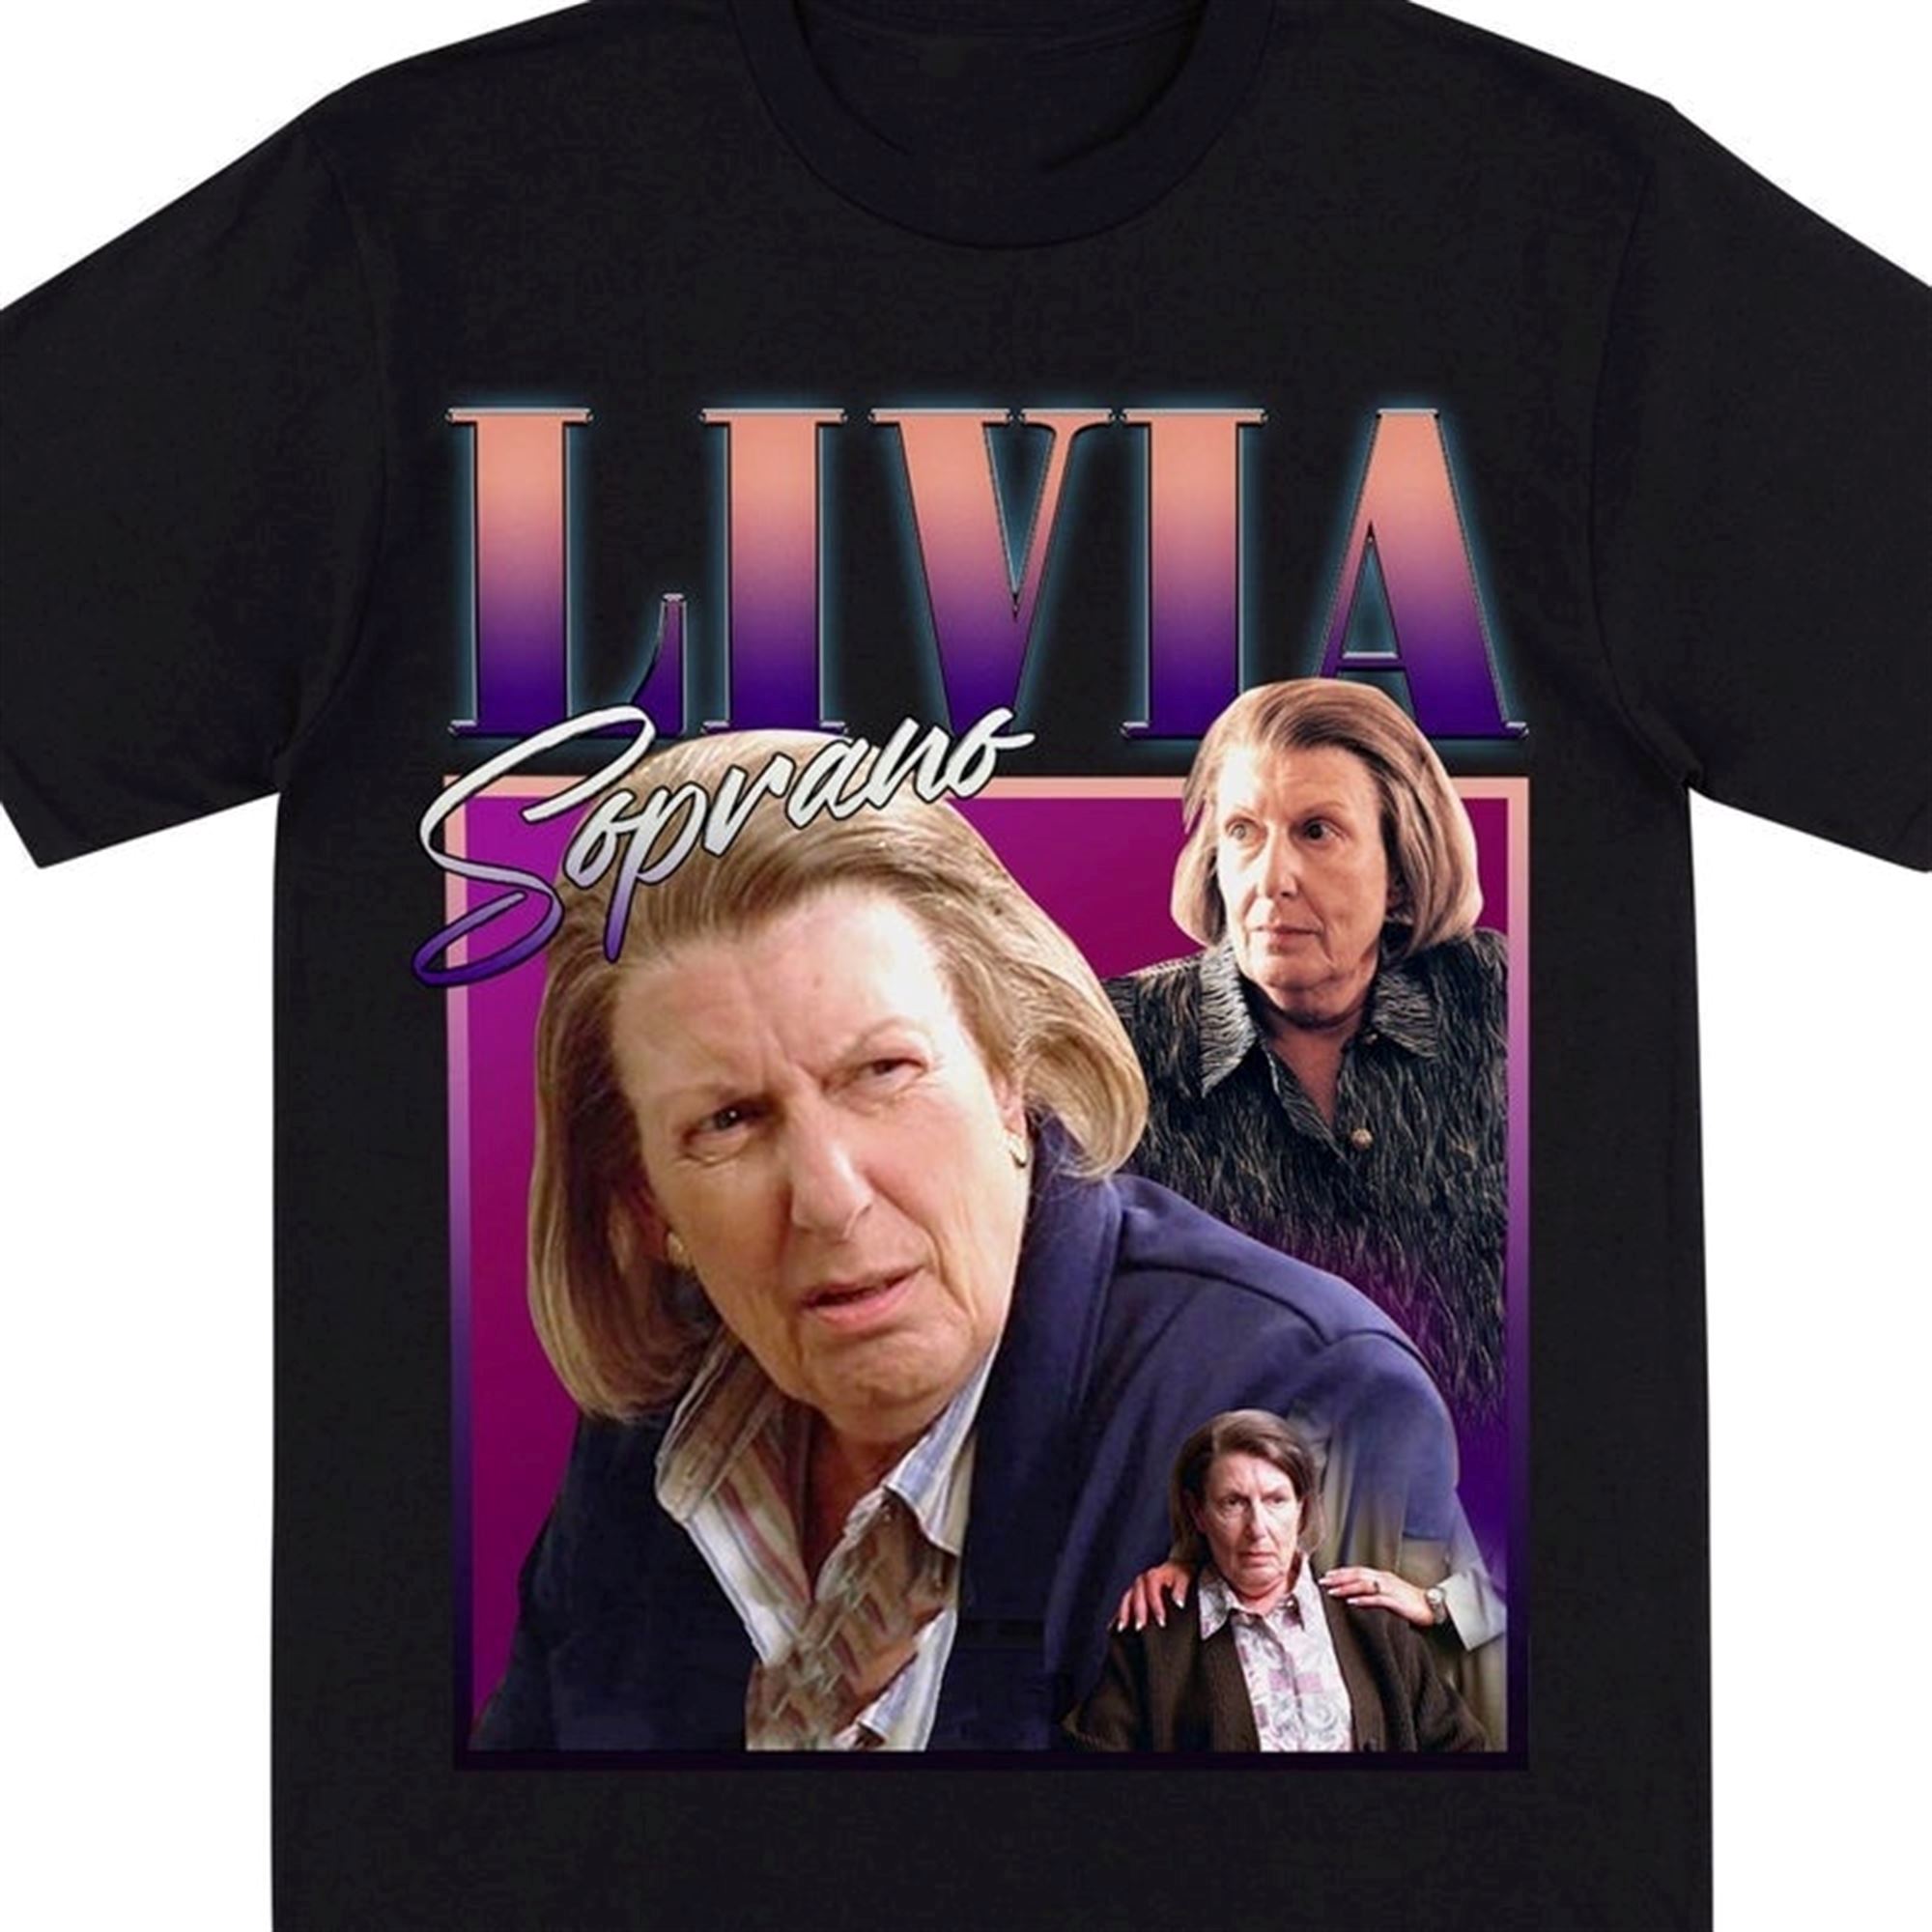 Limited Editon Livia Soprano Homage T Shirt I Dont Like That Kind Of Talk Vintage 90s Tee Mob Boss Inspired T Shirt 